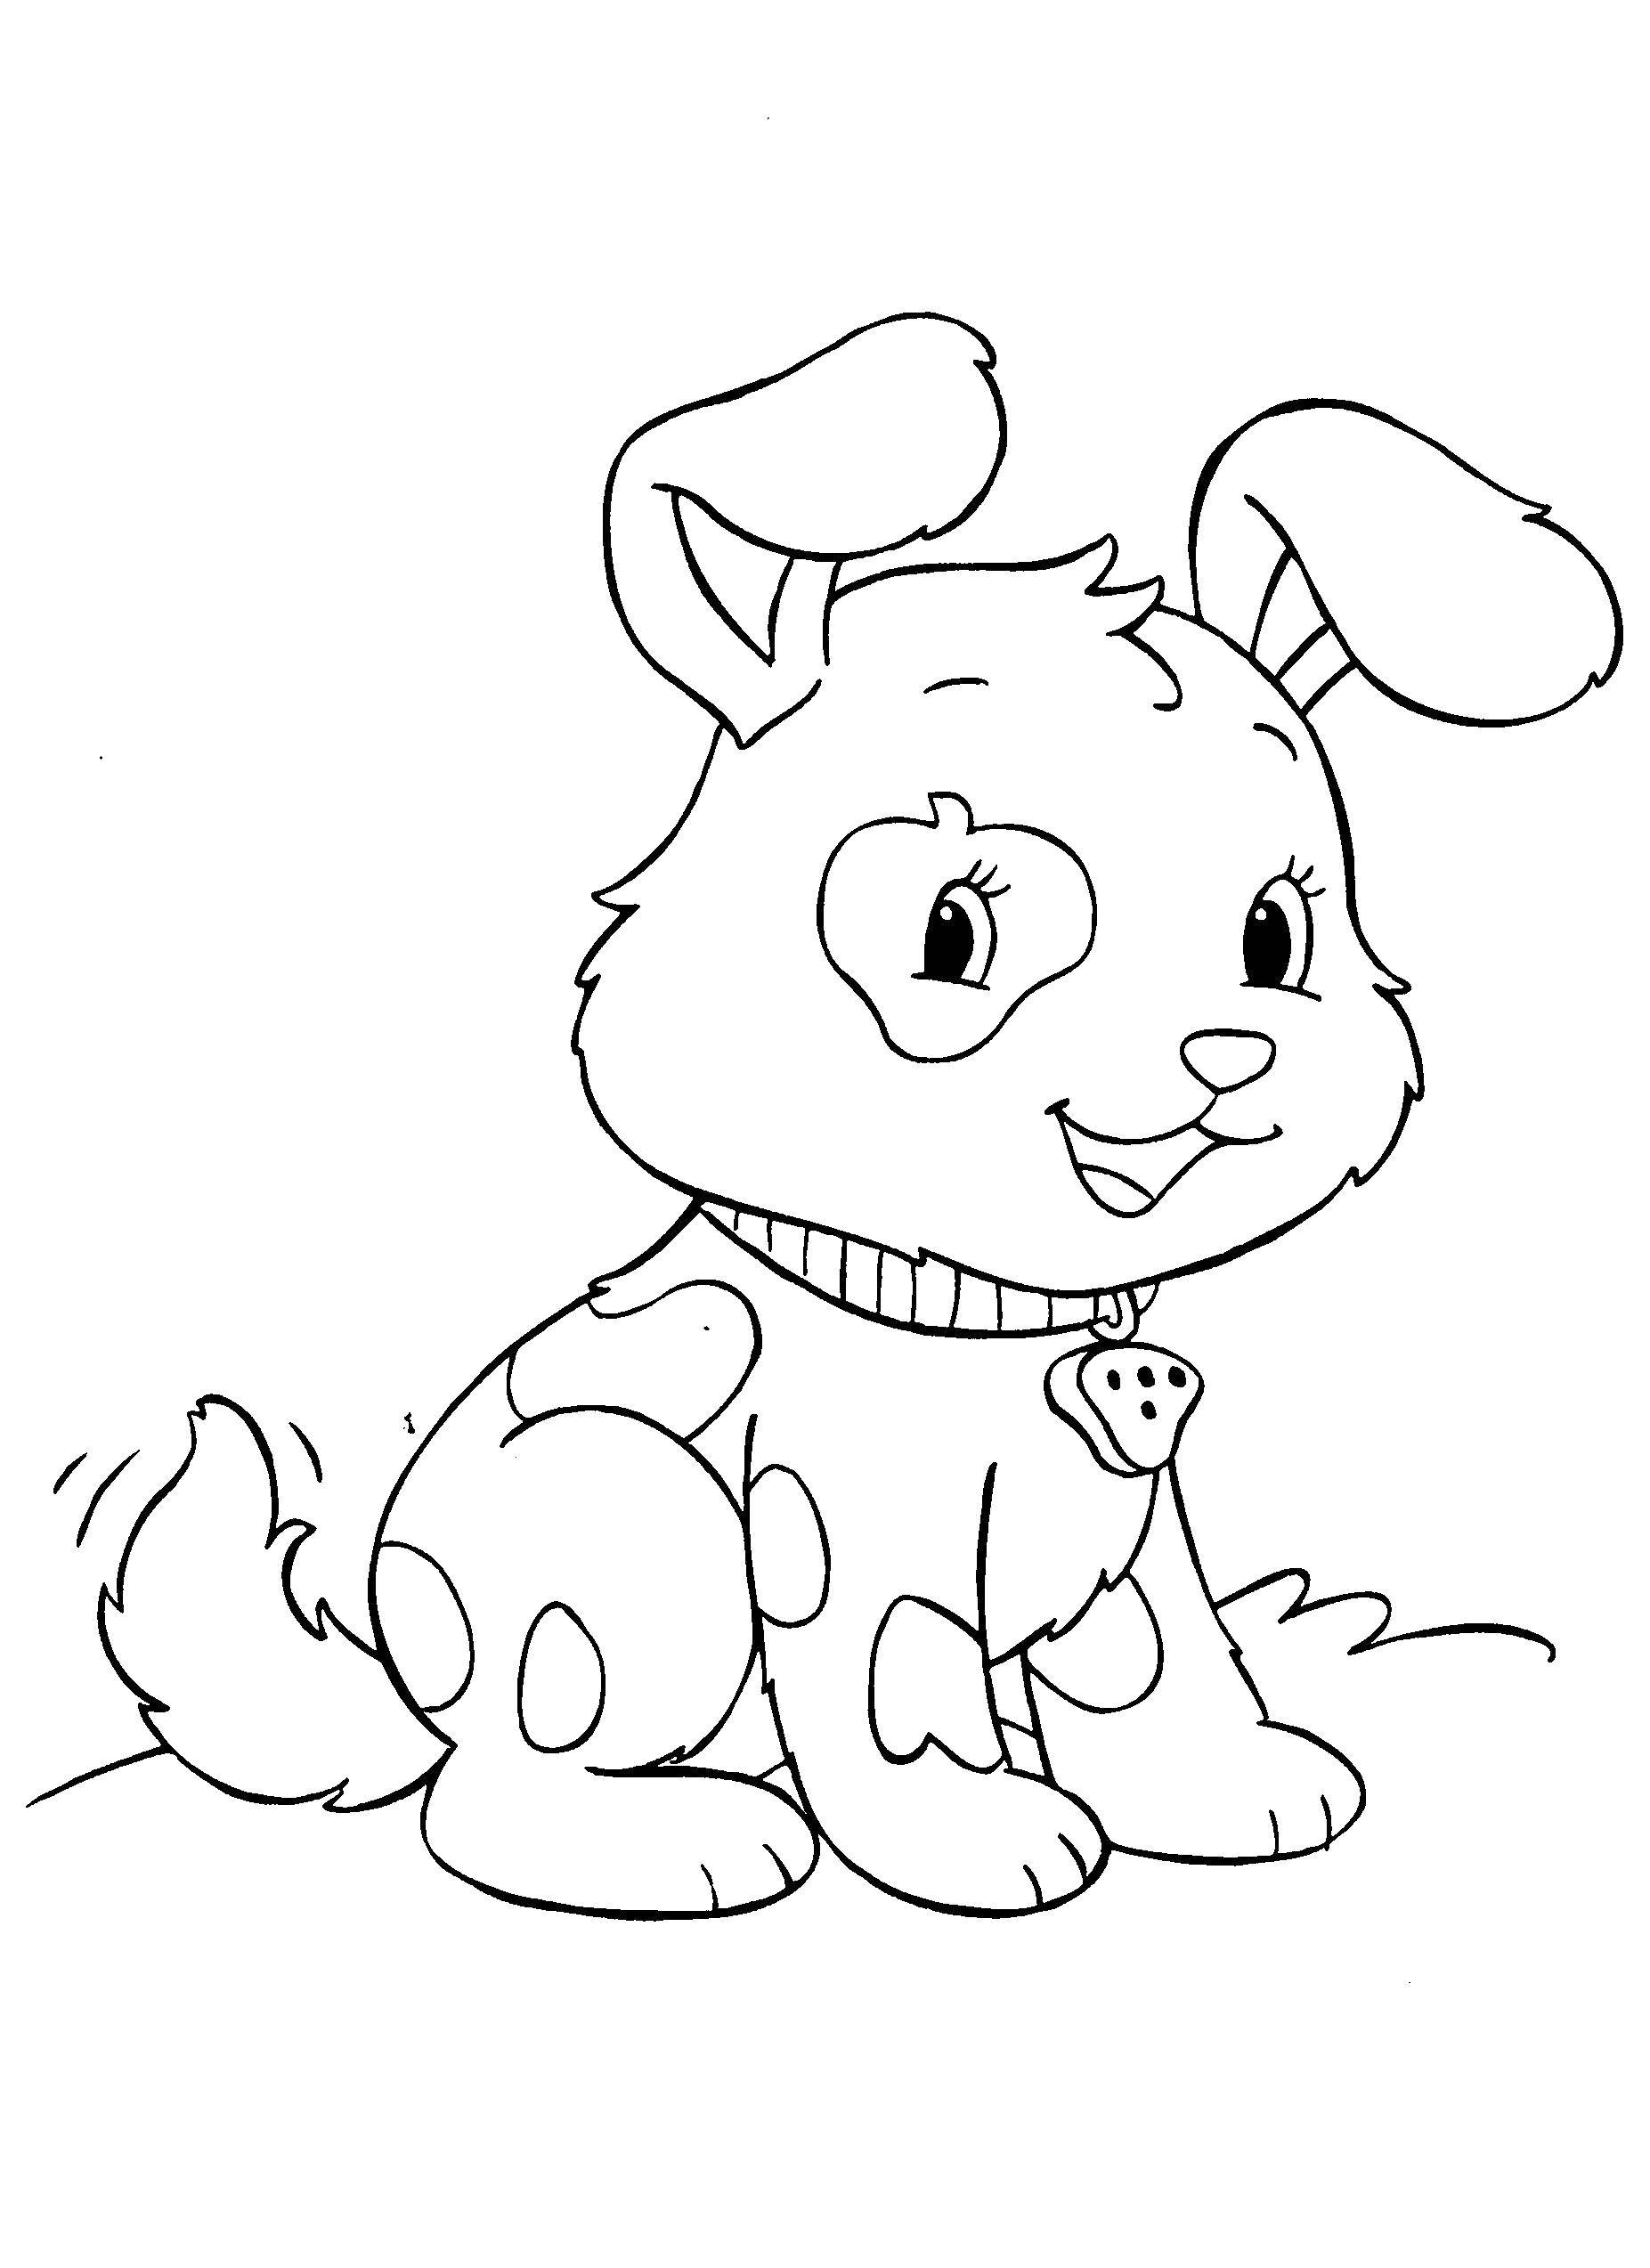 Coloring Cute puppy. Category coloring. Tags:  for children, puppies, dogs.